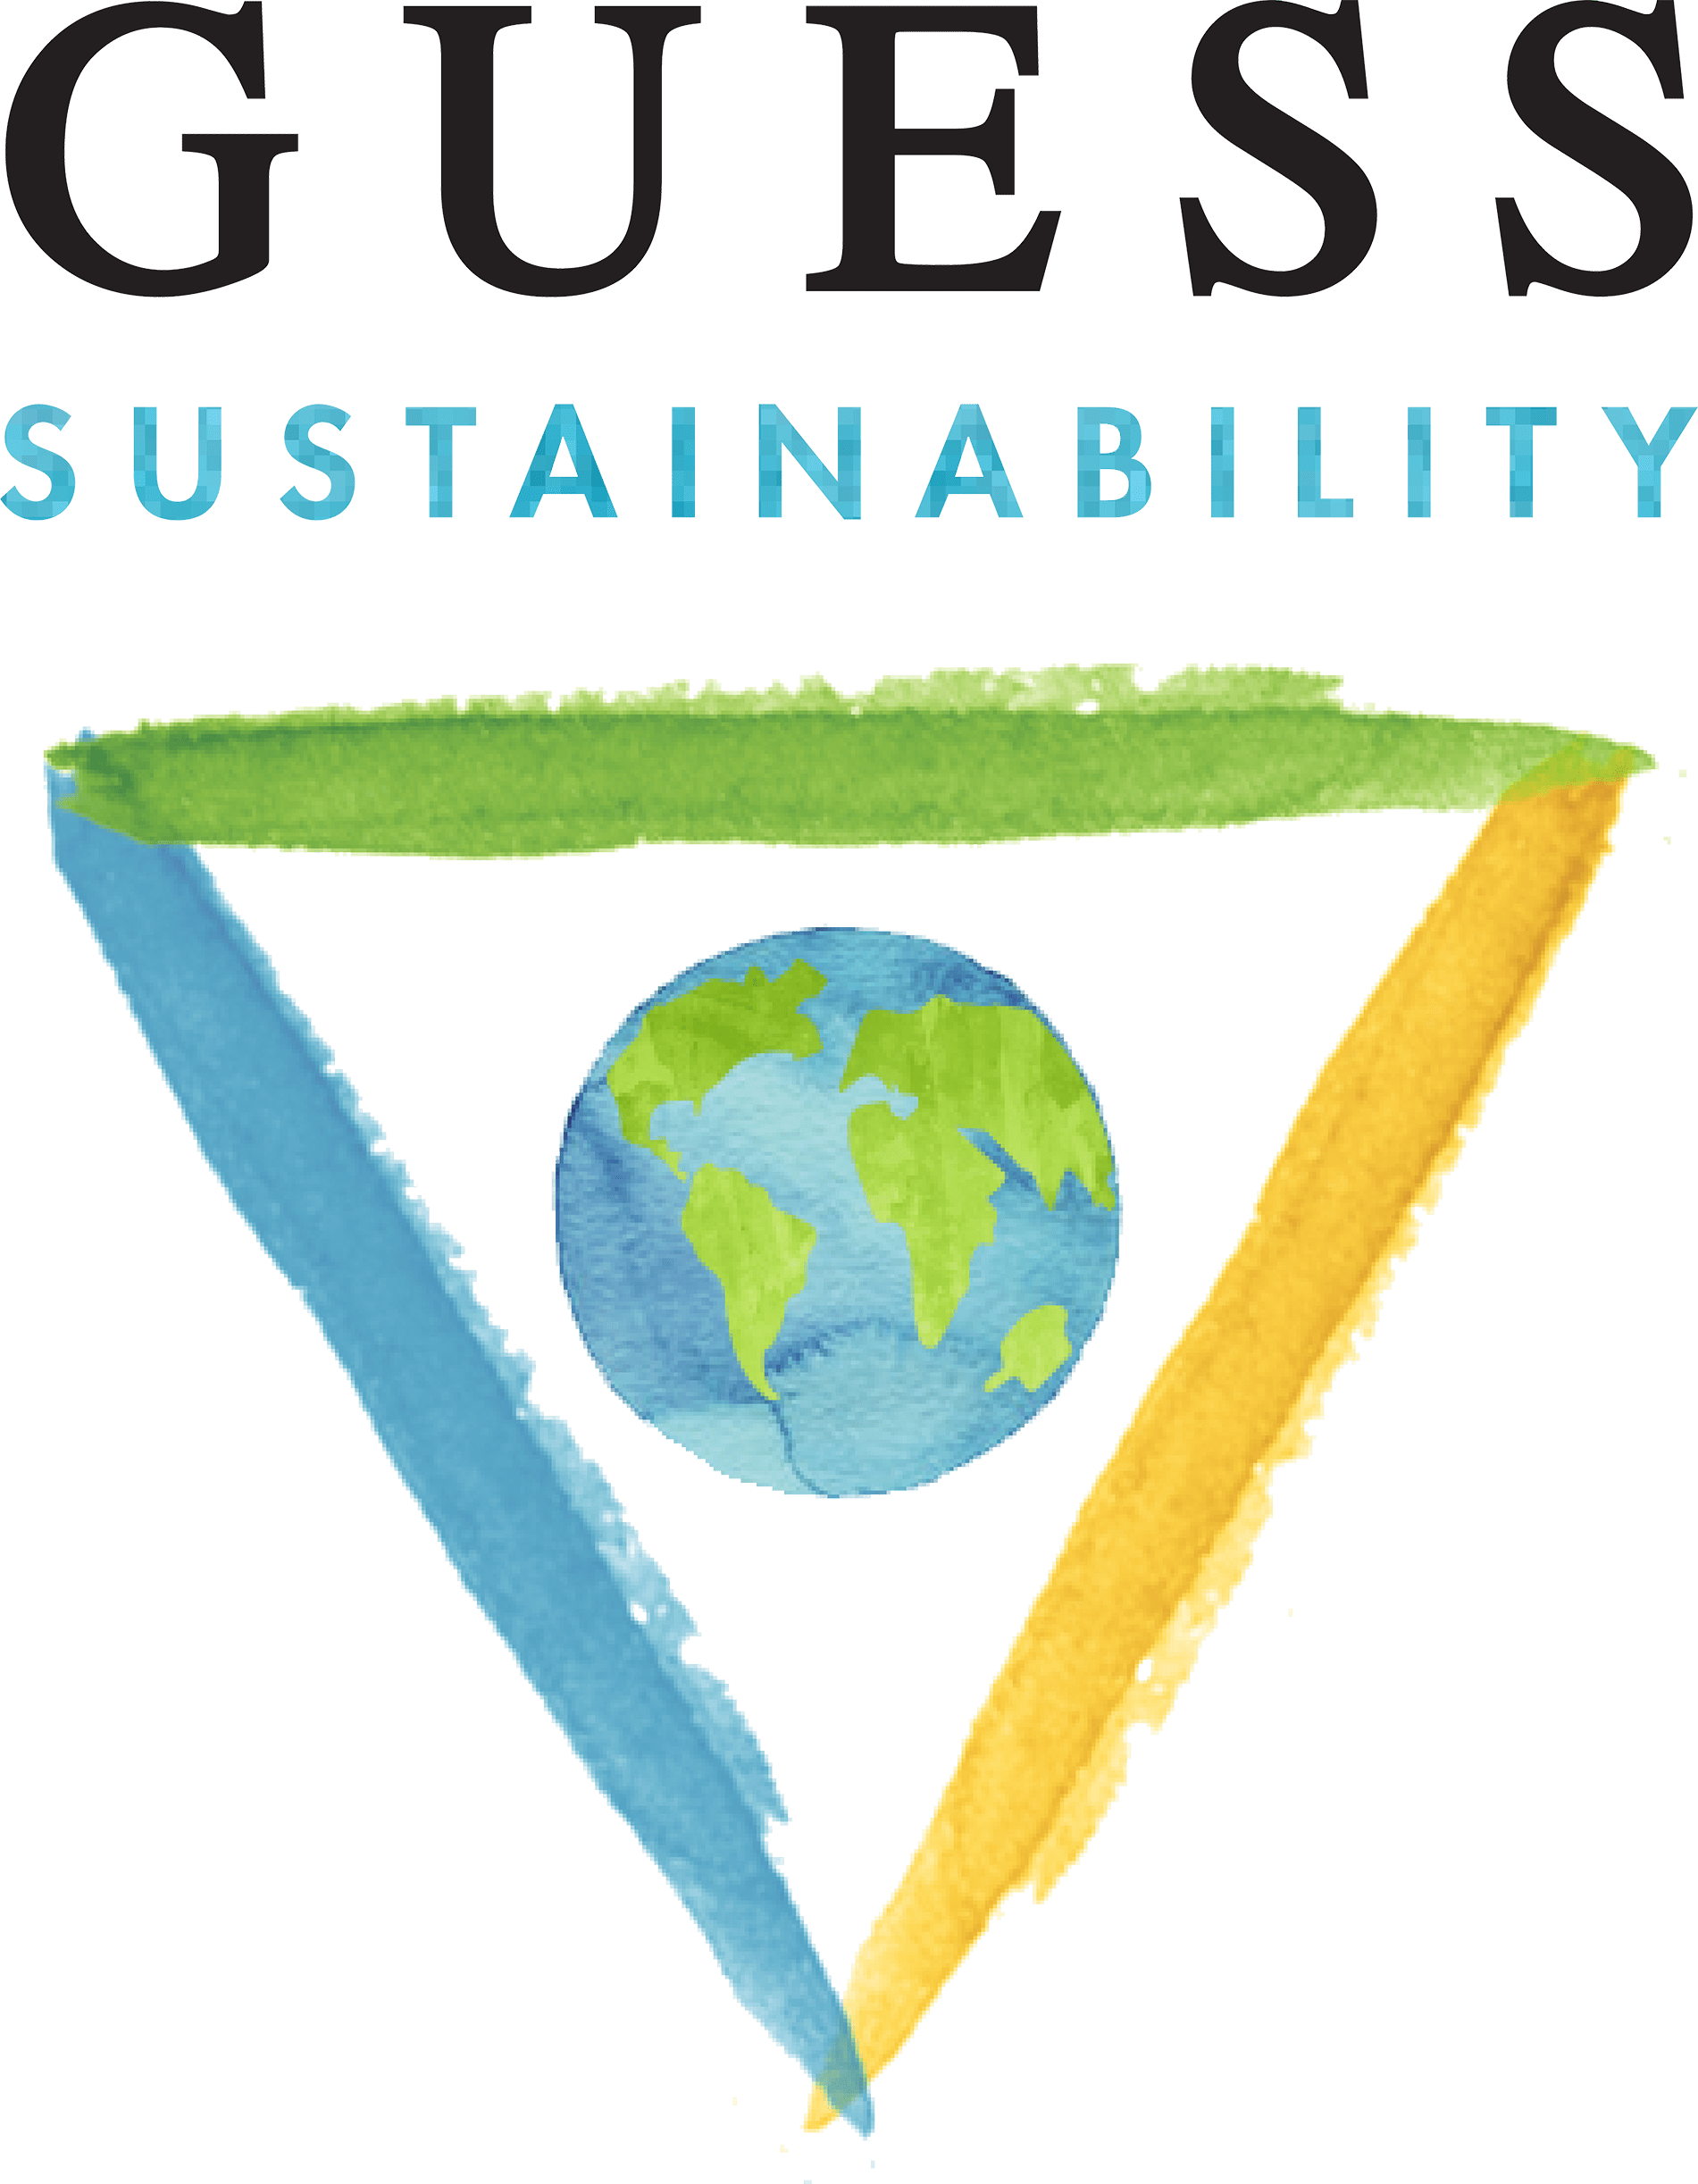 GUESS Sustainability